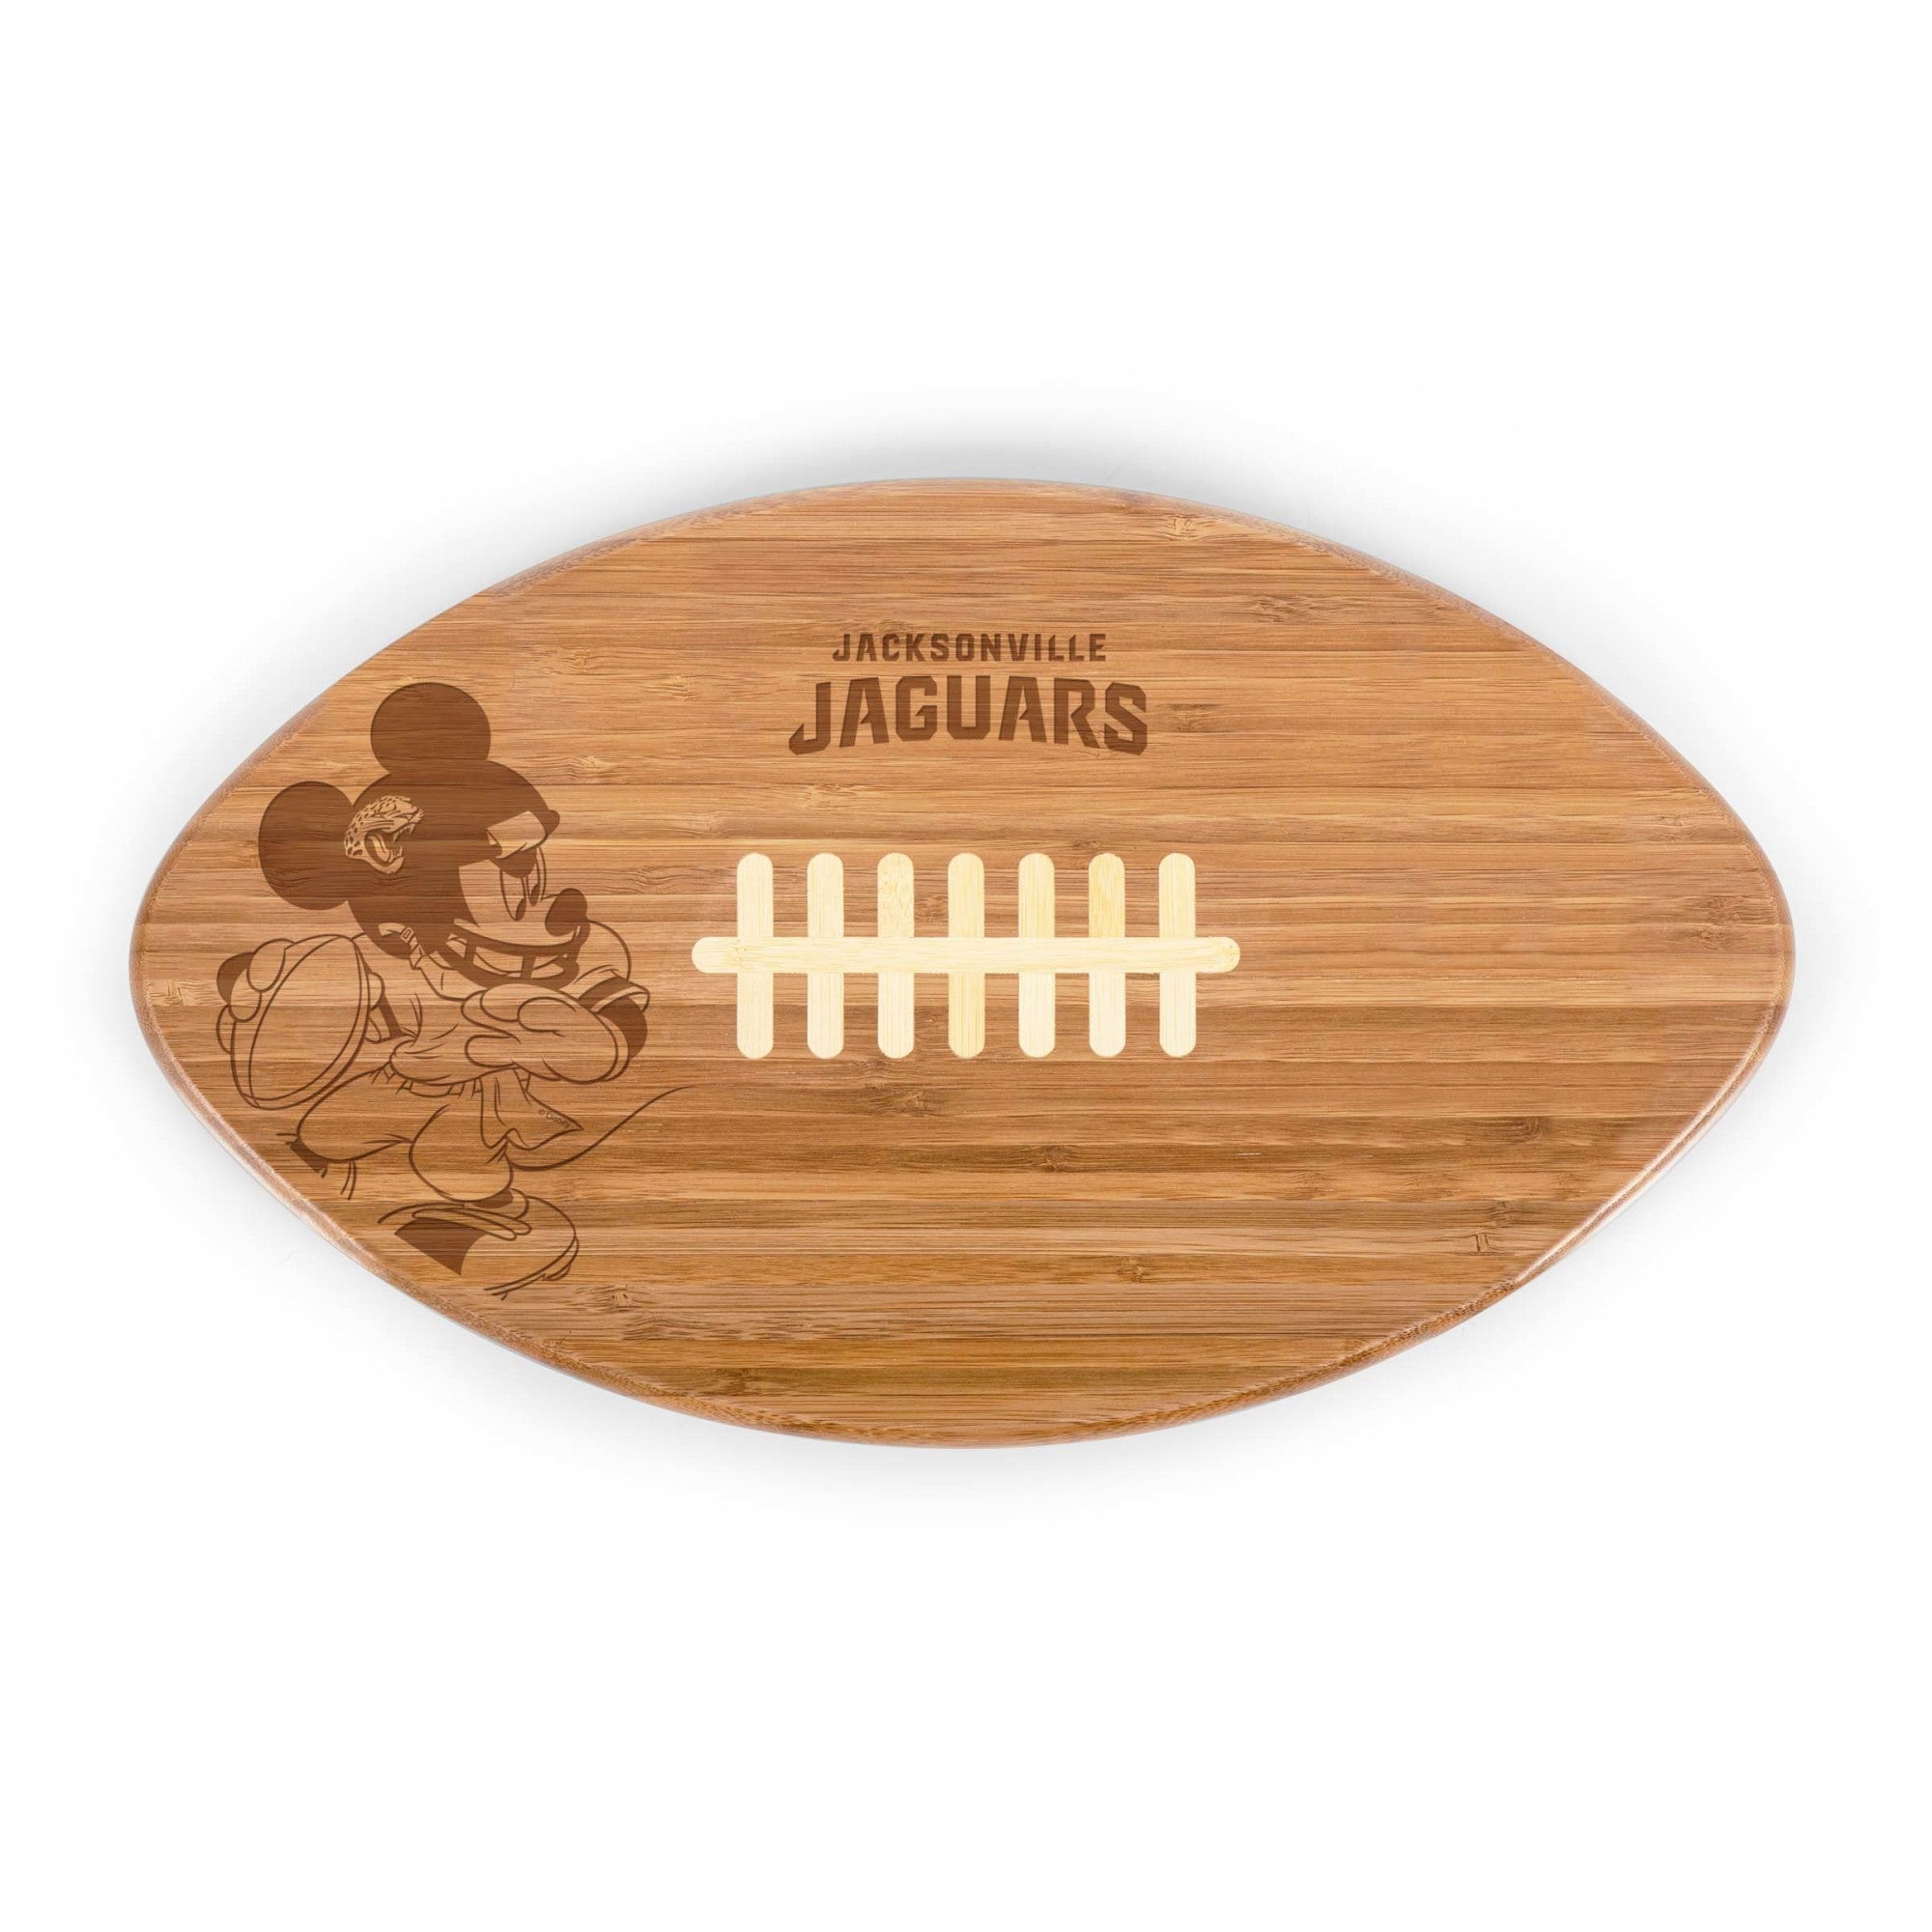 Mickey Mouse - Jacksonville Jaguars - Touchdown! Football Cutting Board & Serving Tray